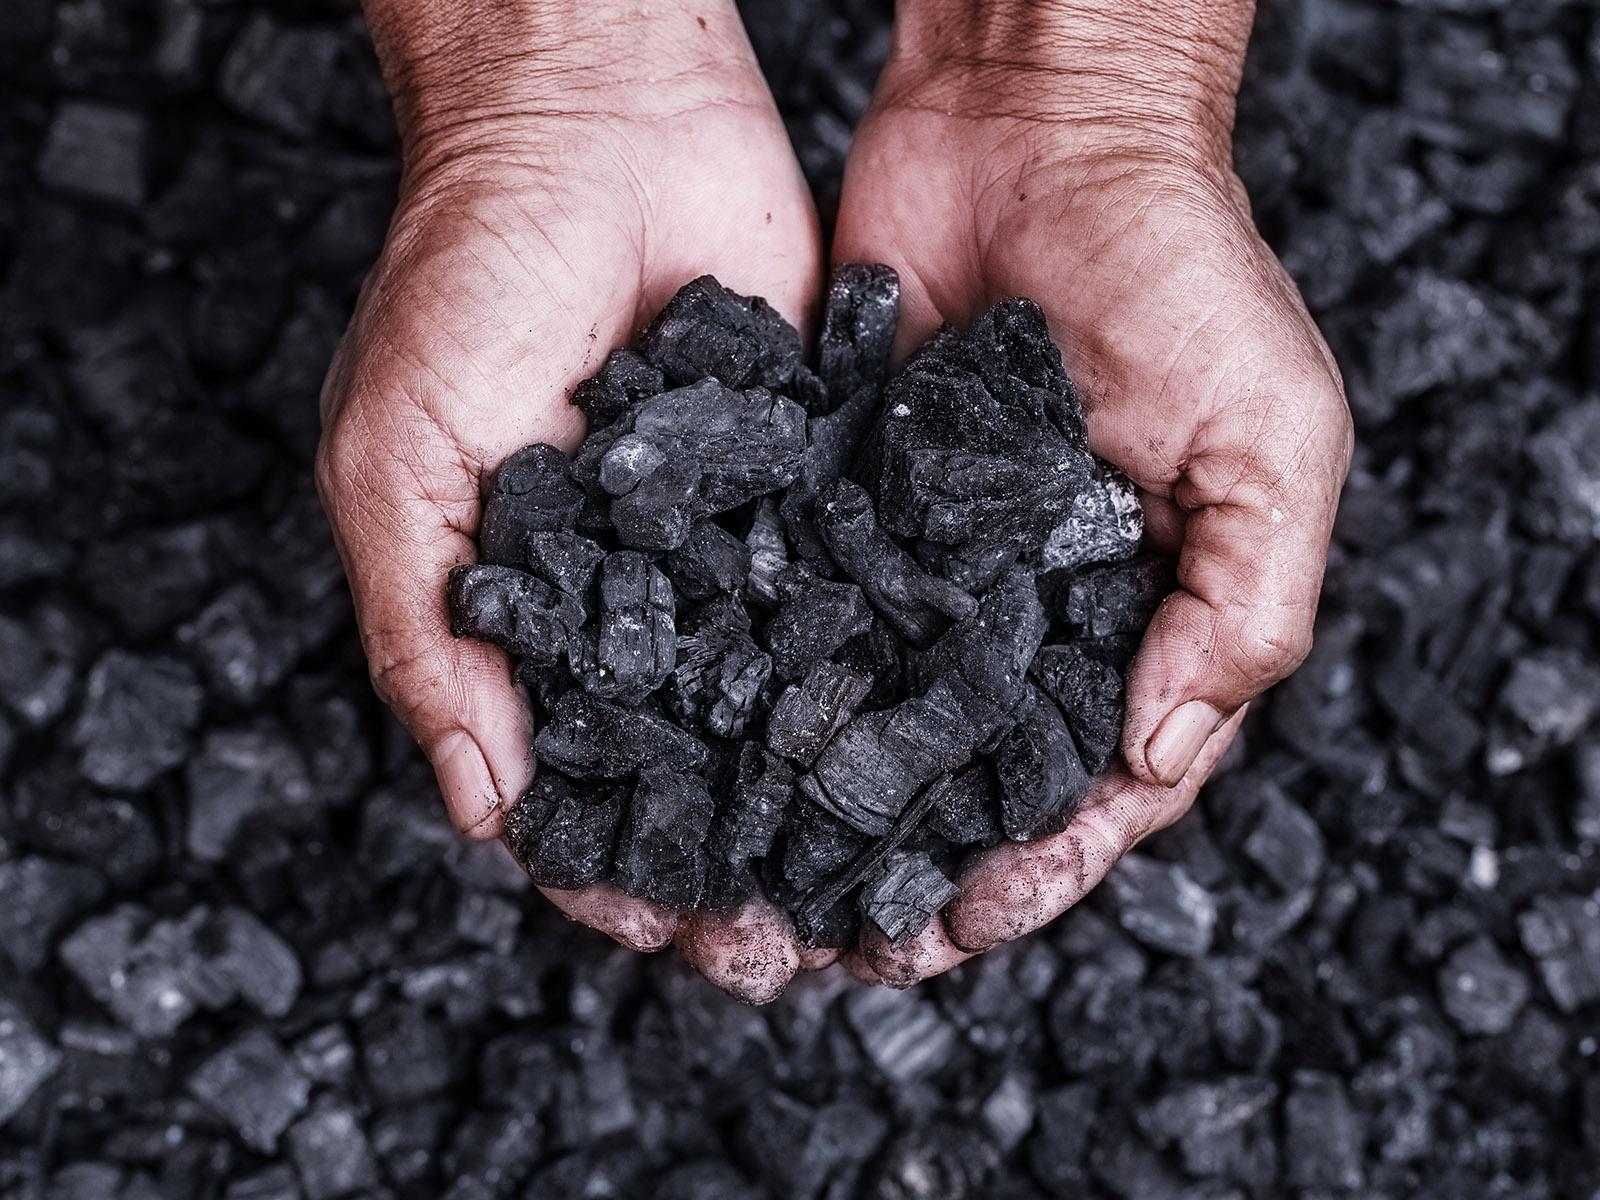 Methane Emissions from Coal Mines Are Higher Than Previously Thought